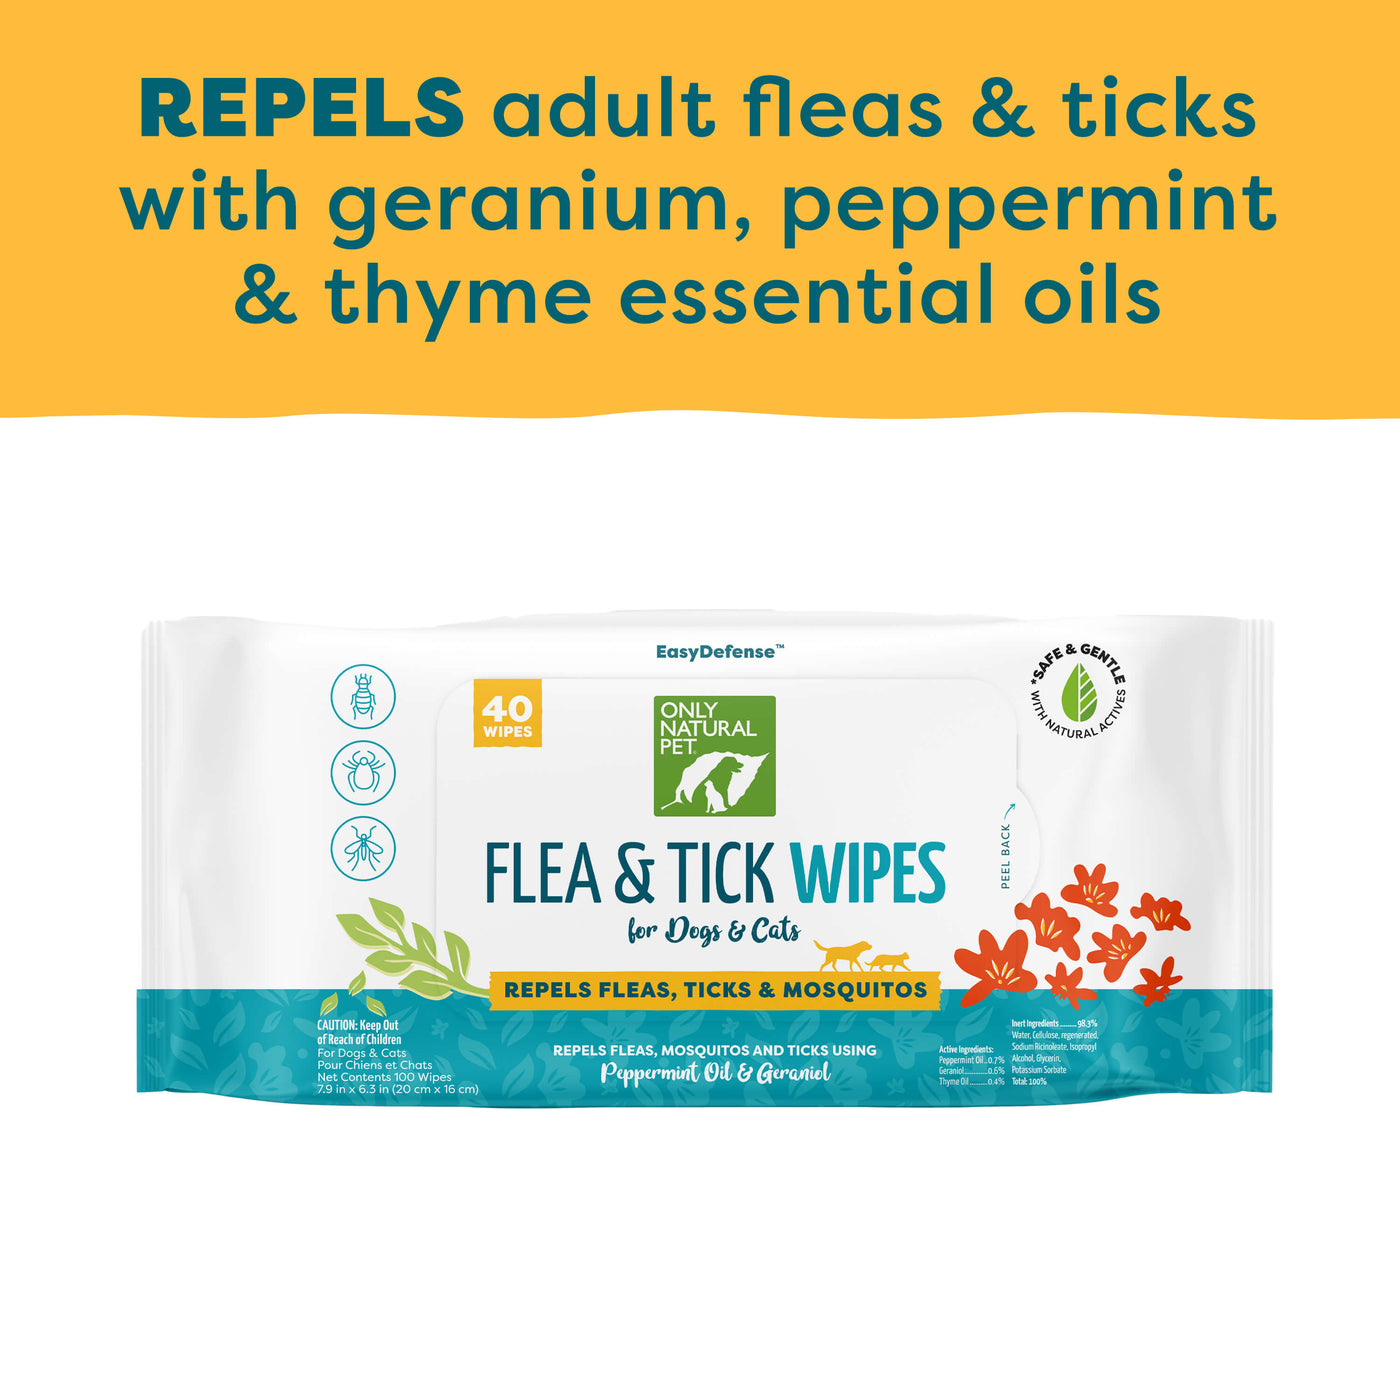 EasyDefense Flea & Tick Wipes for Dogs & Cats